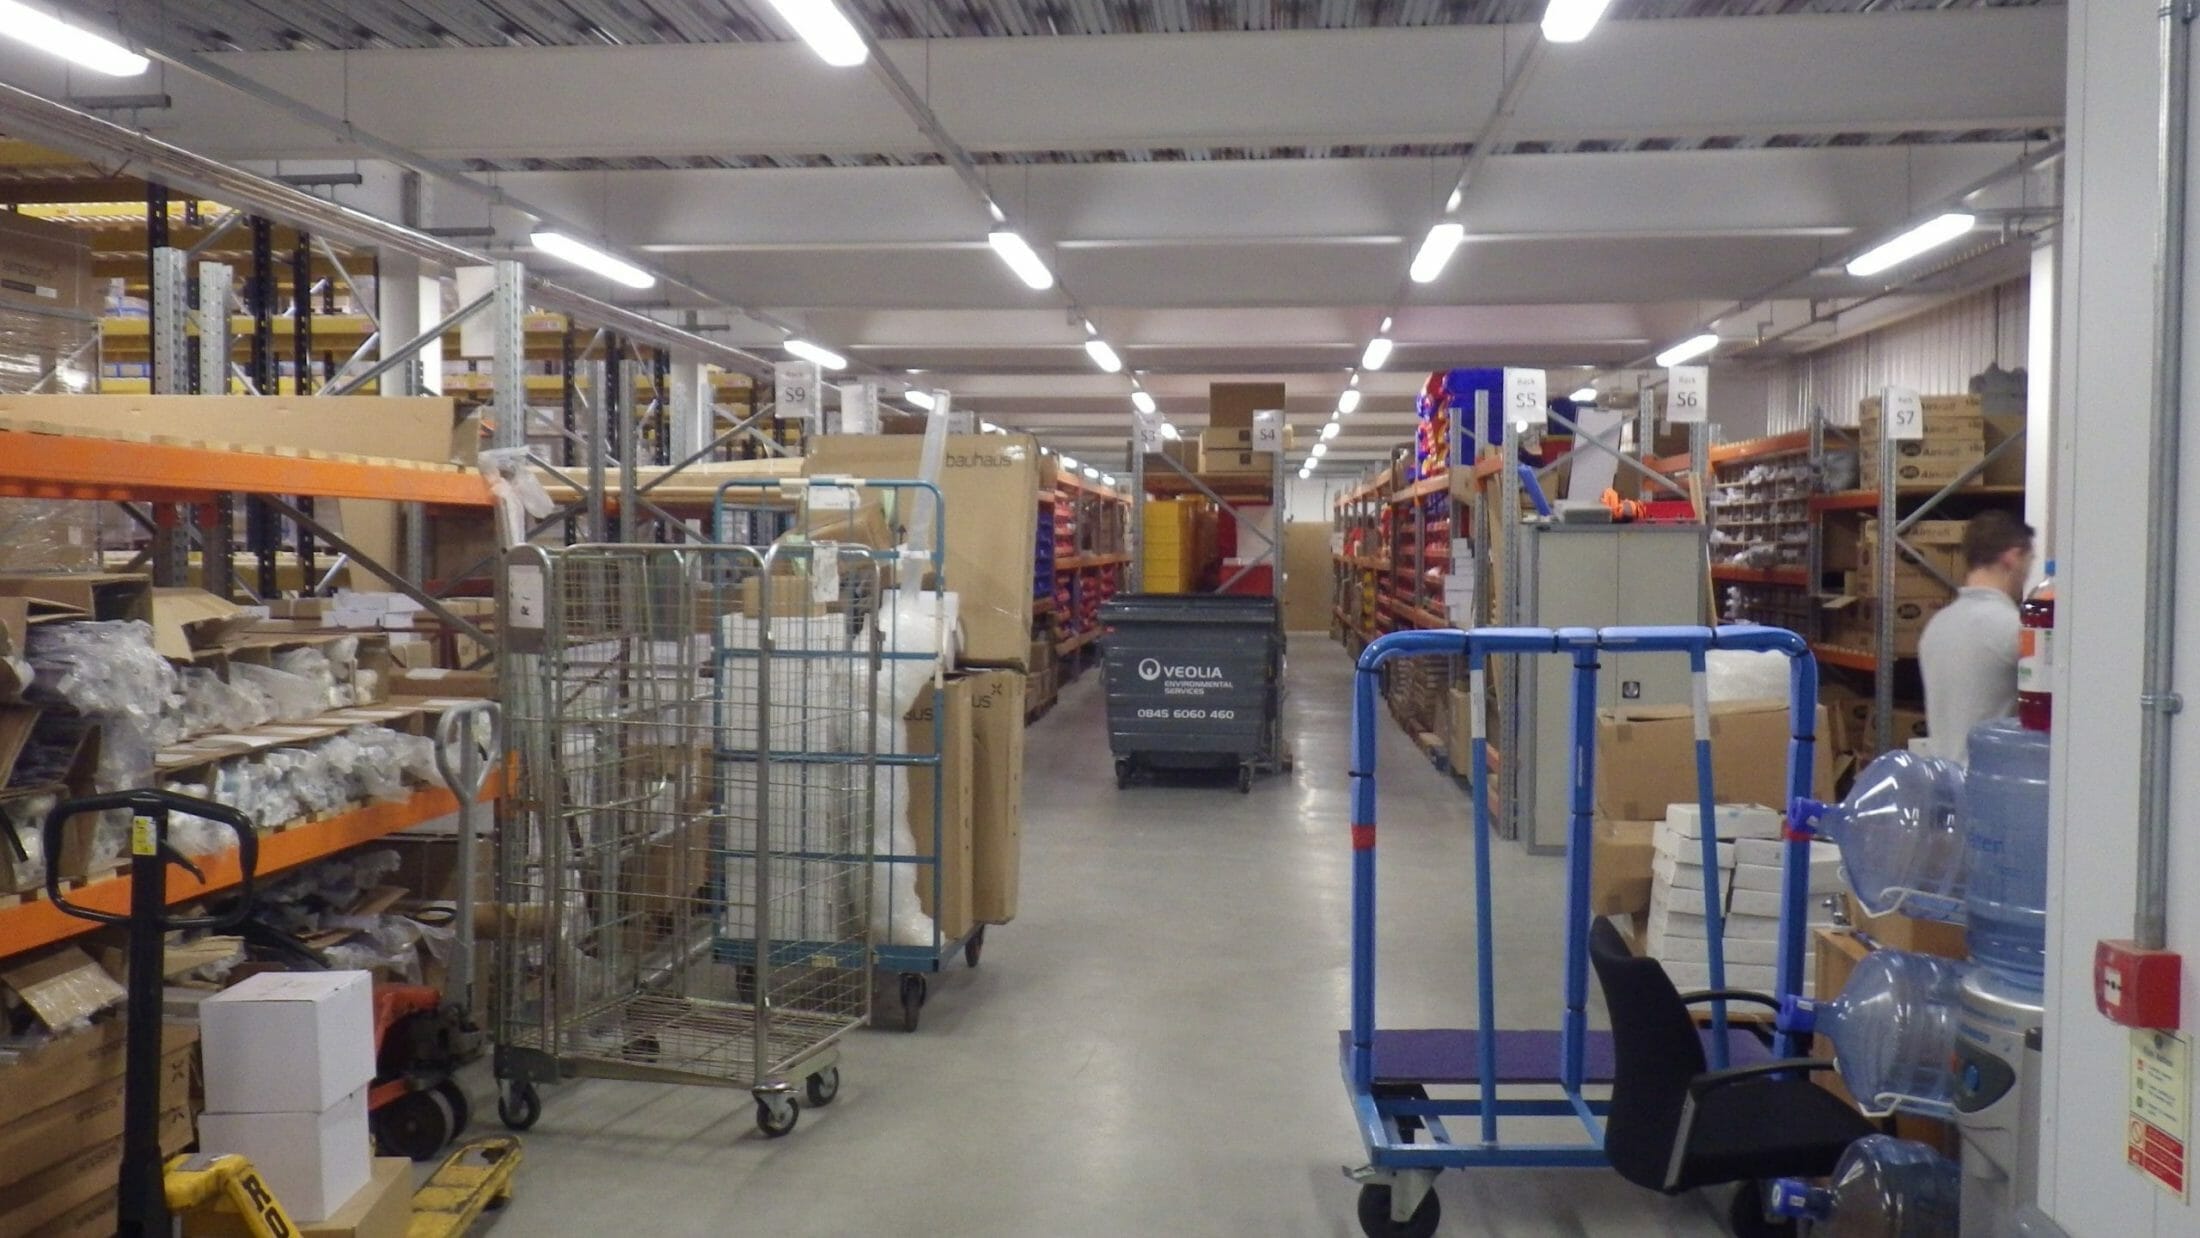 Commercial pest control contract in warehouse